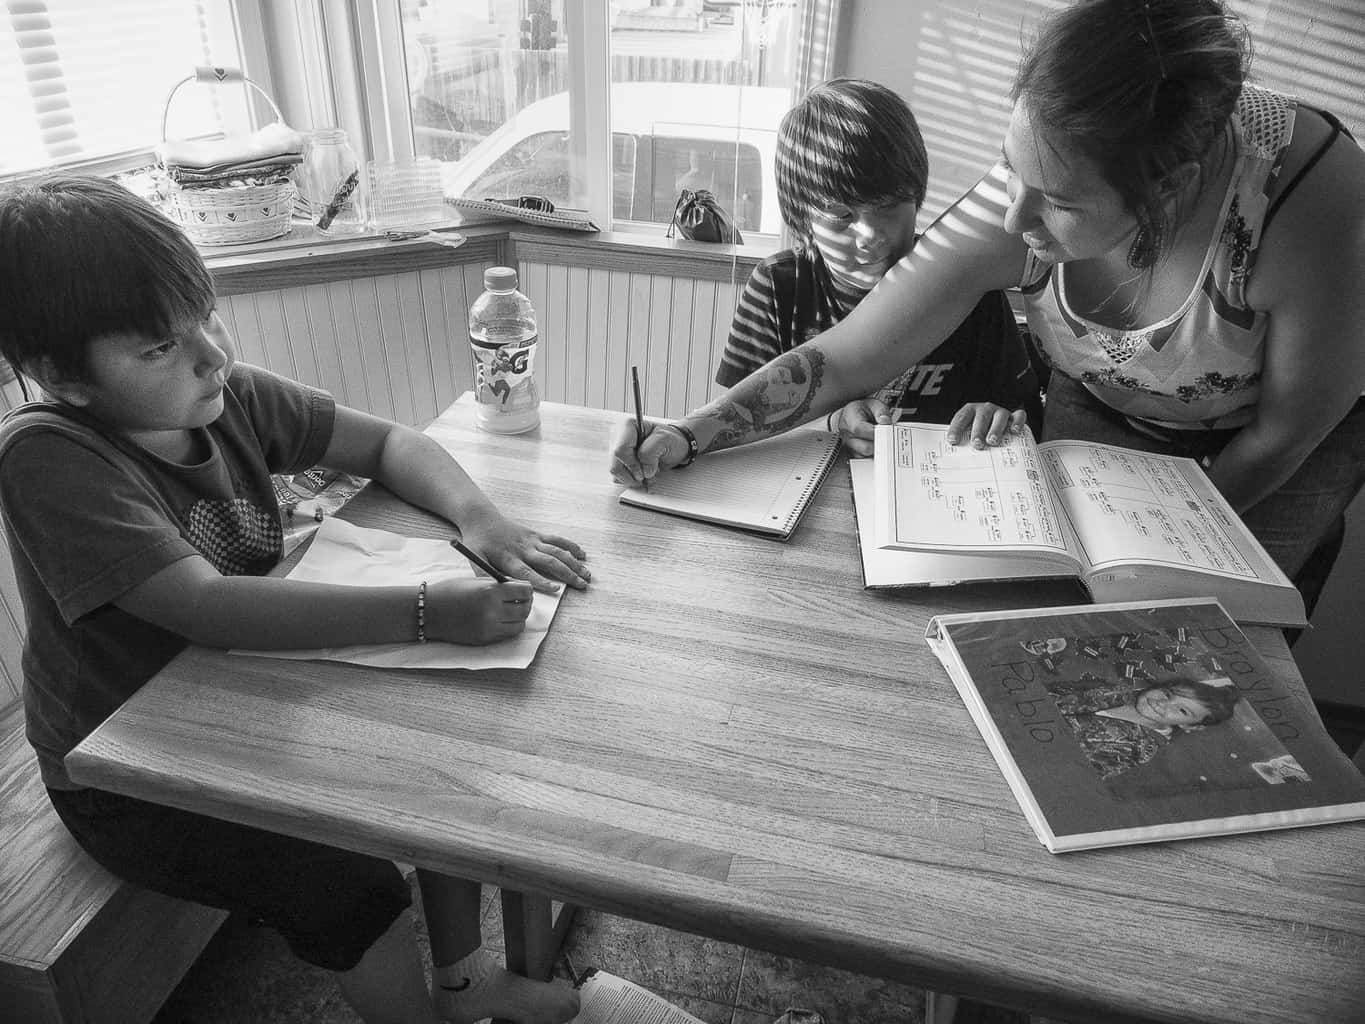 Everyday Native: Healing Racism through Education